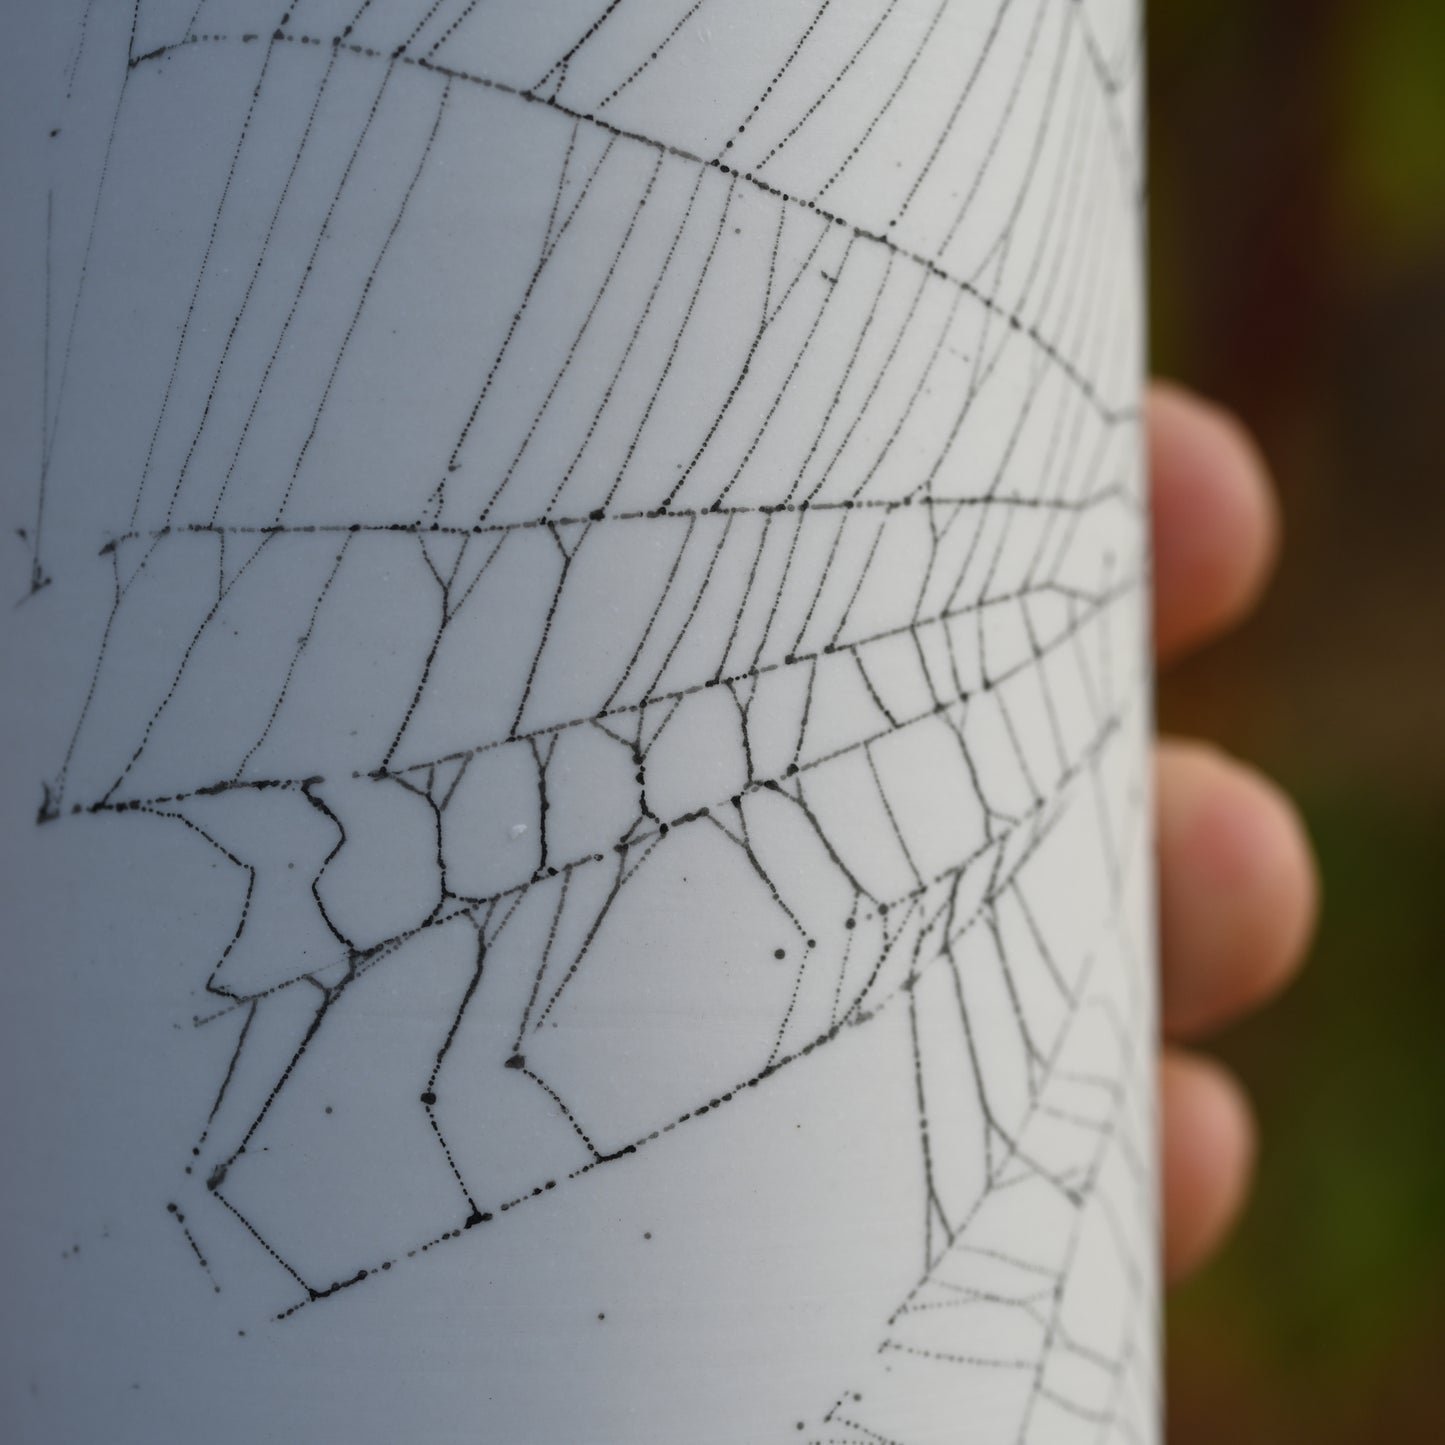 Web on Clay (085), Collected September 04, 2022